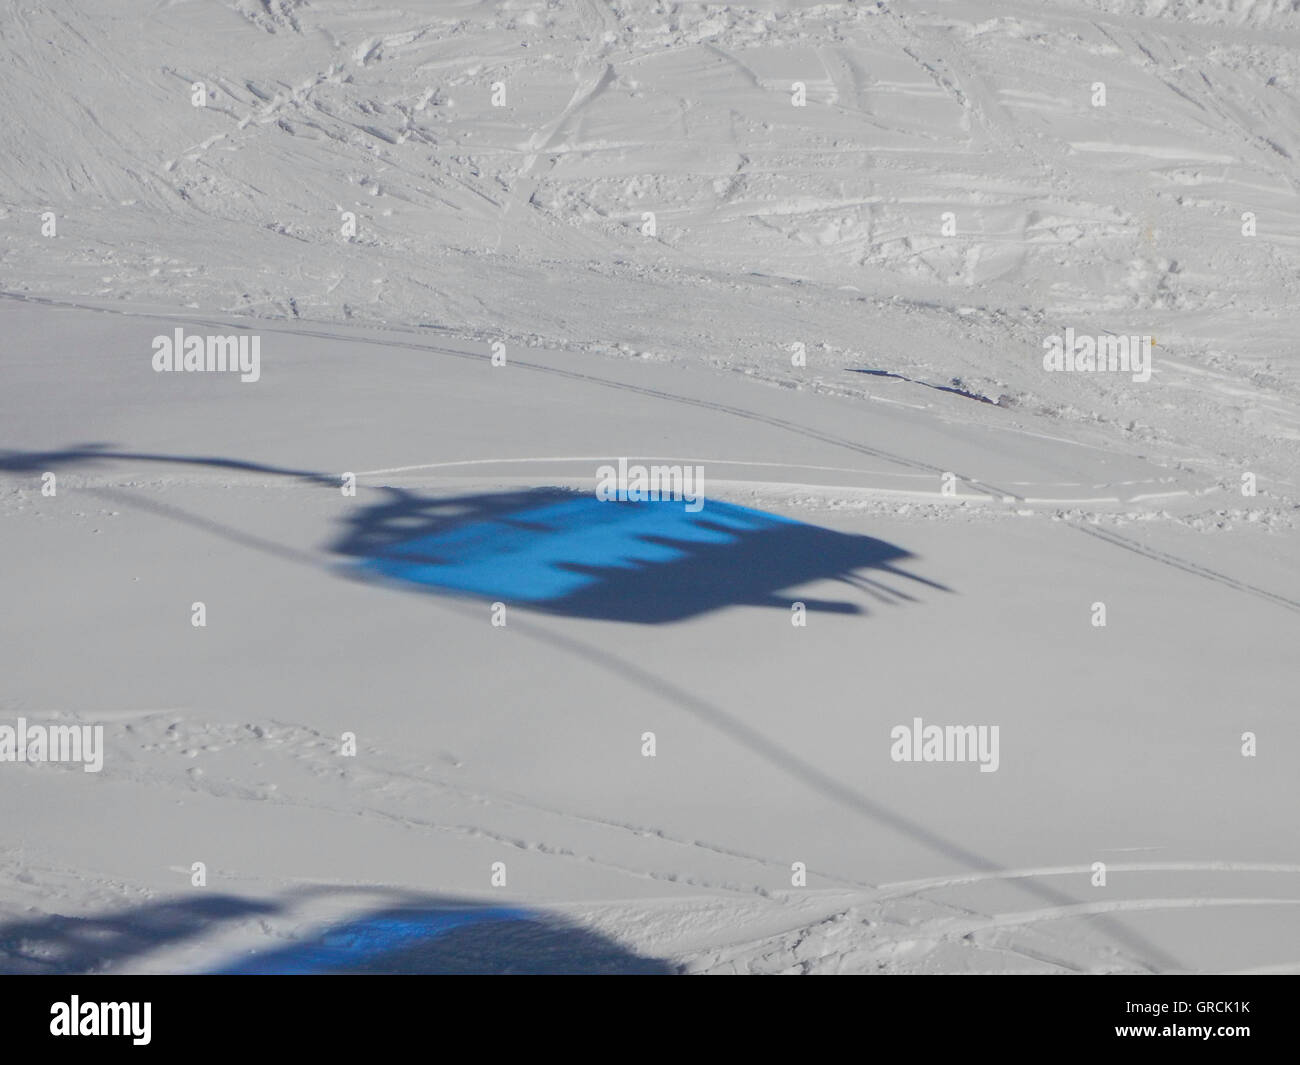 Blue Silhouette Of A Chairlift With Skiers On A White Snowfield With Ski Tracks Stock Photo